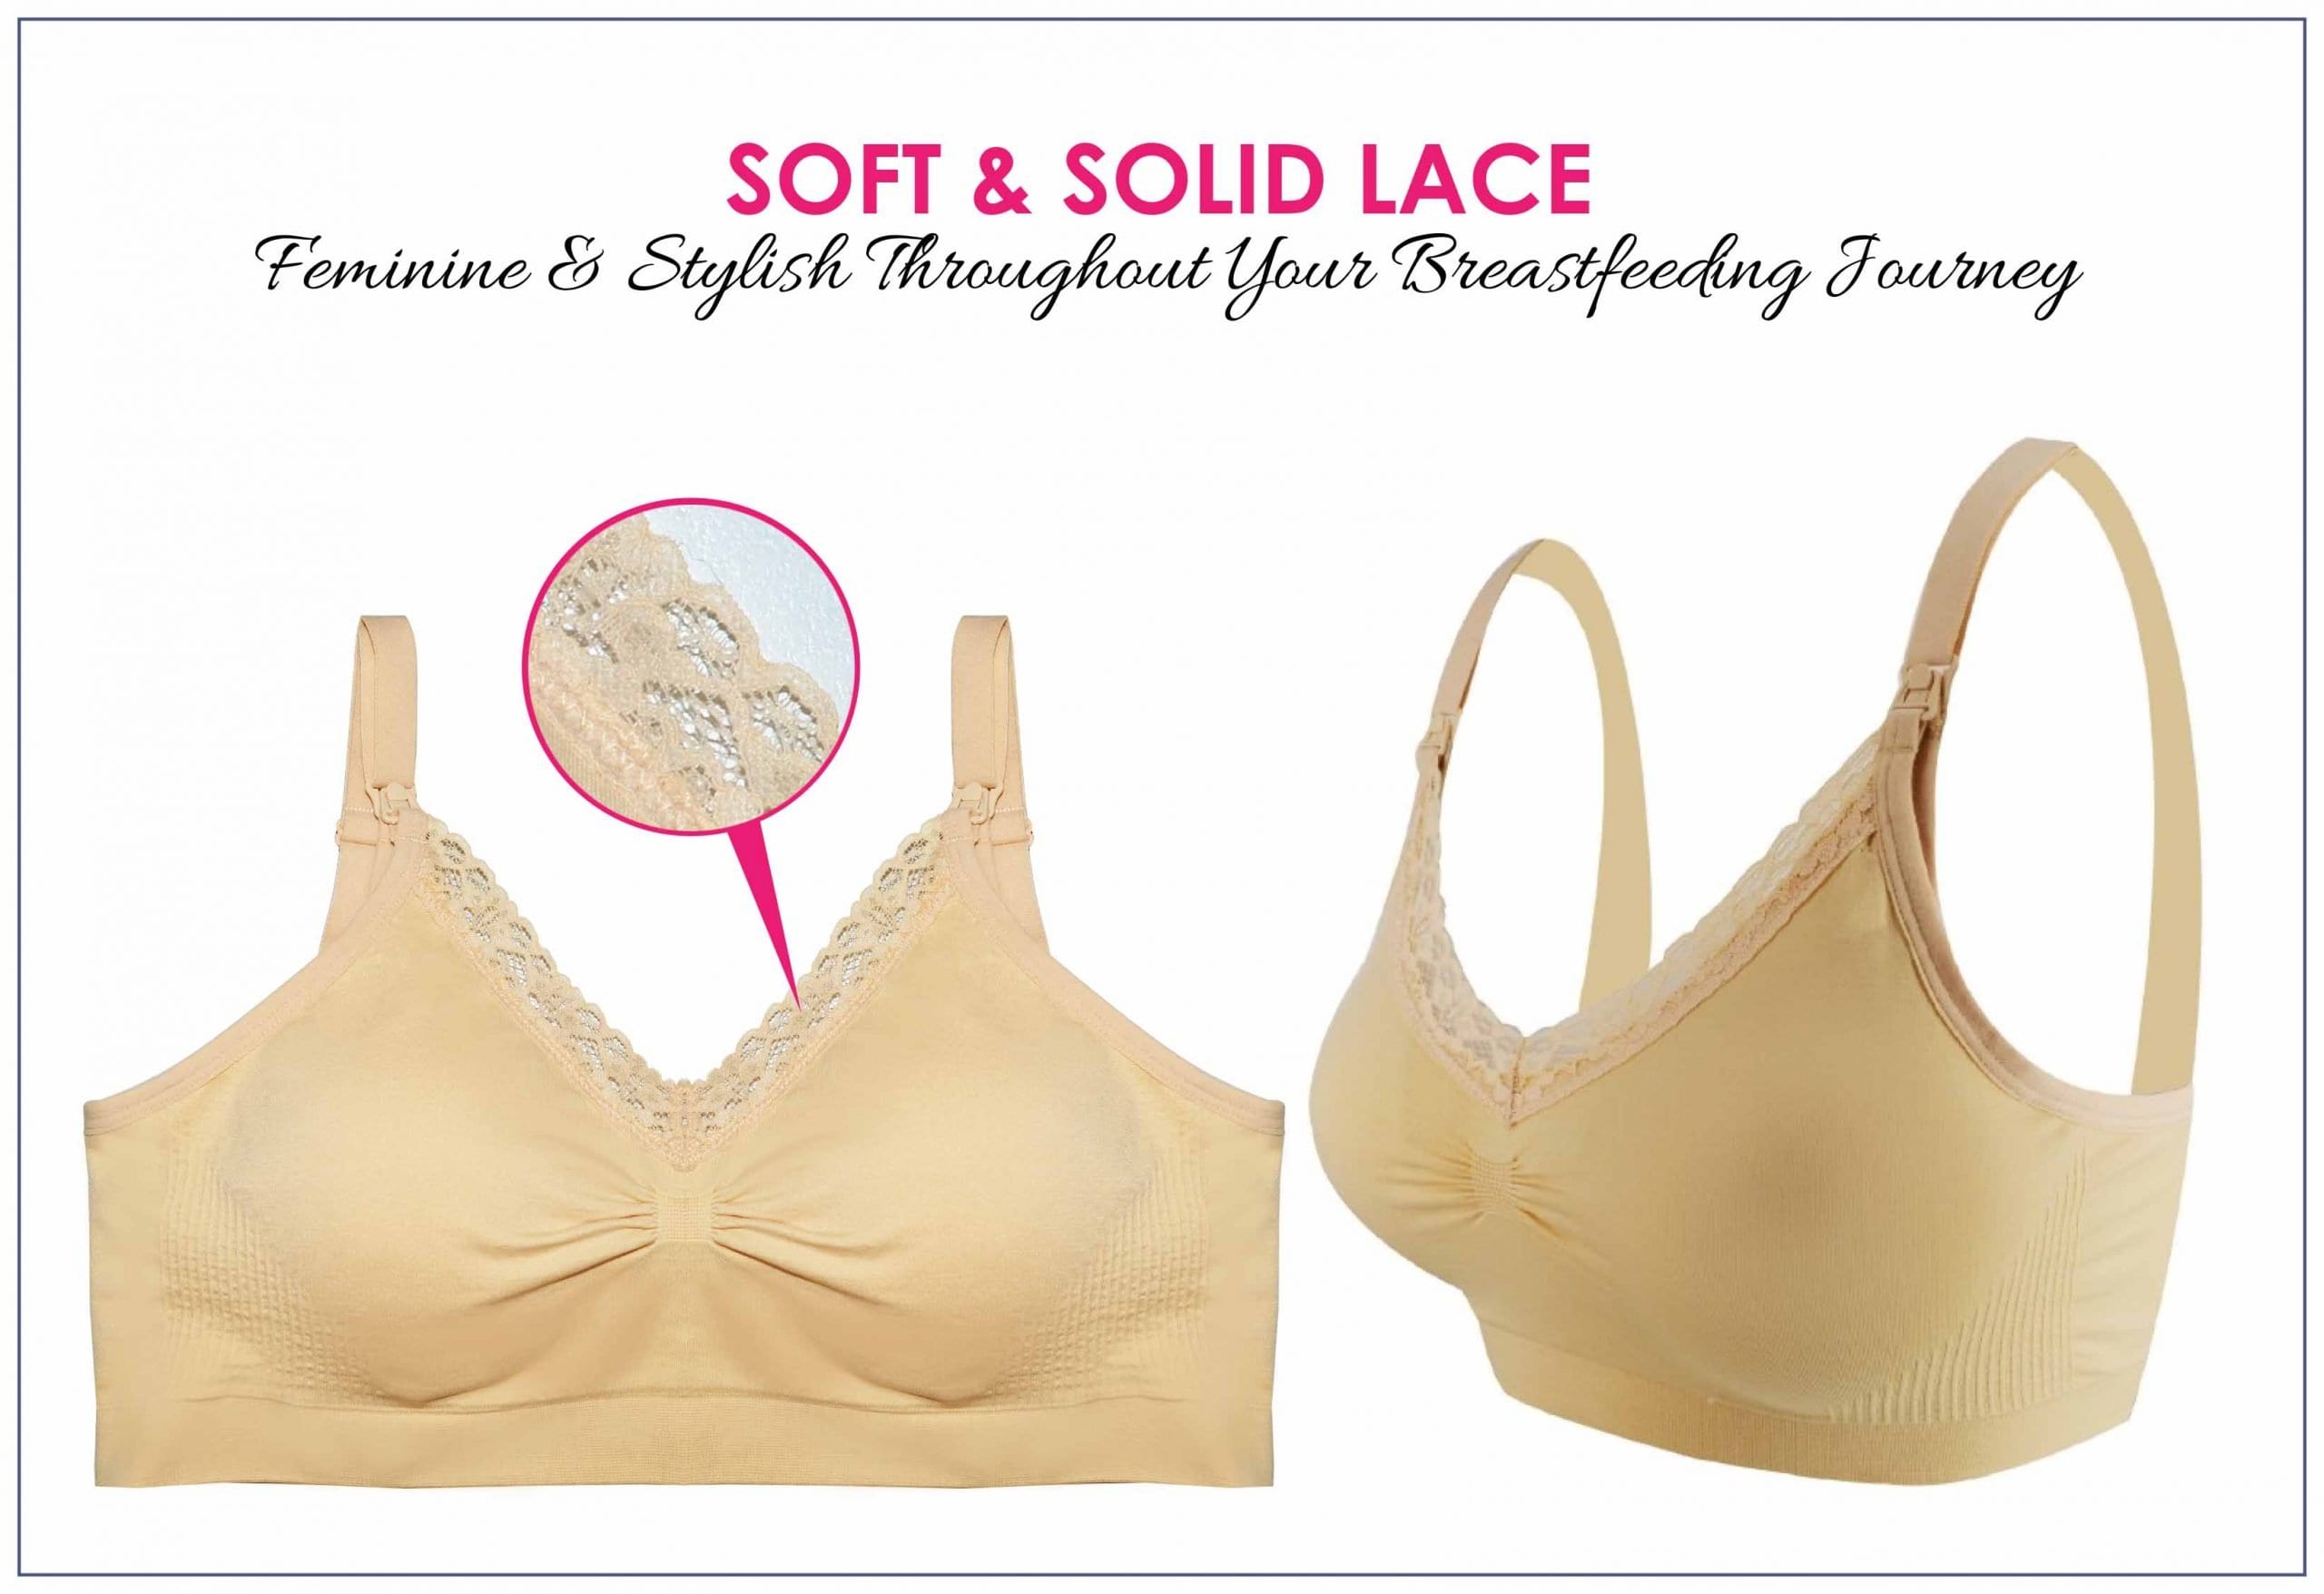 Soft & Solid Lace